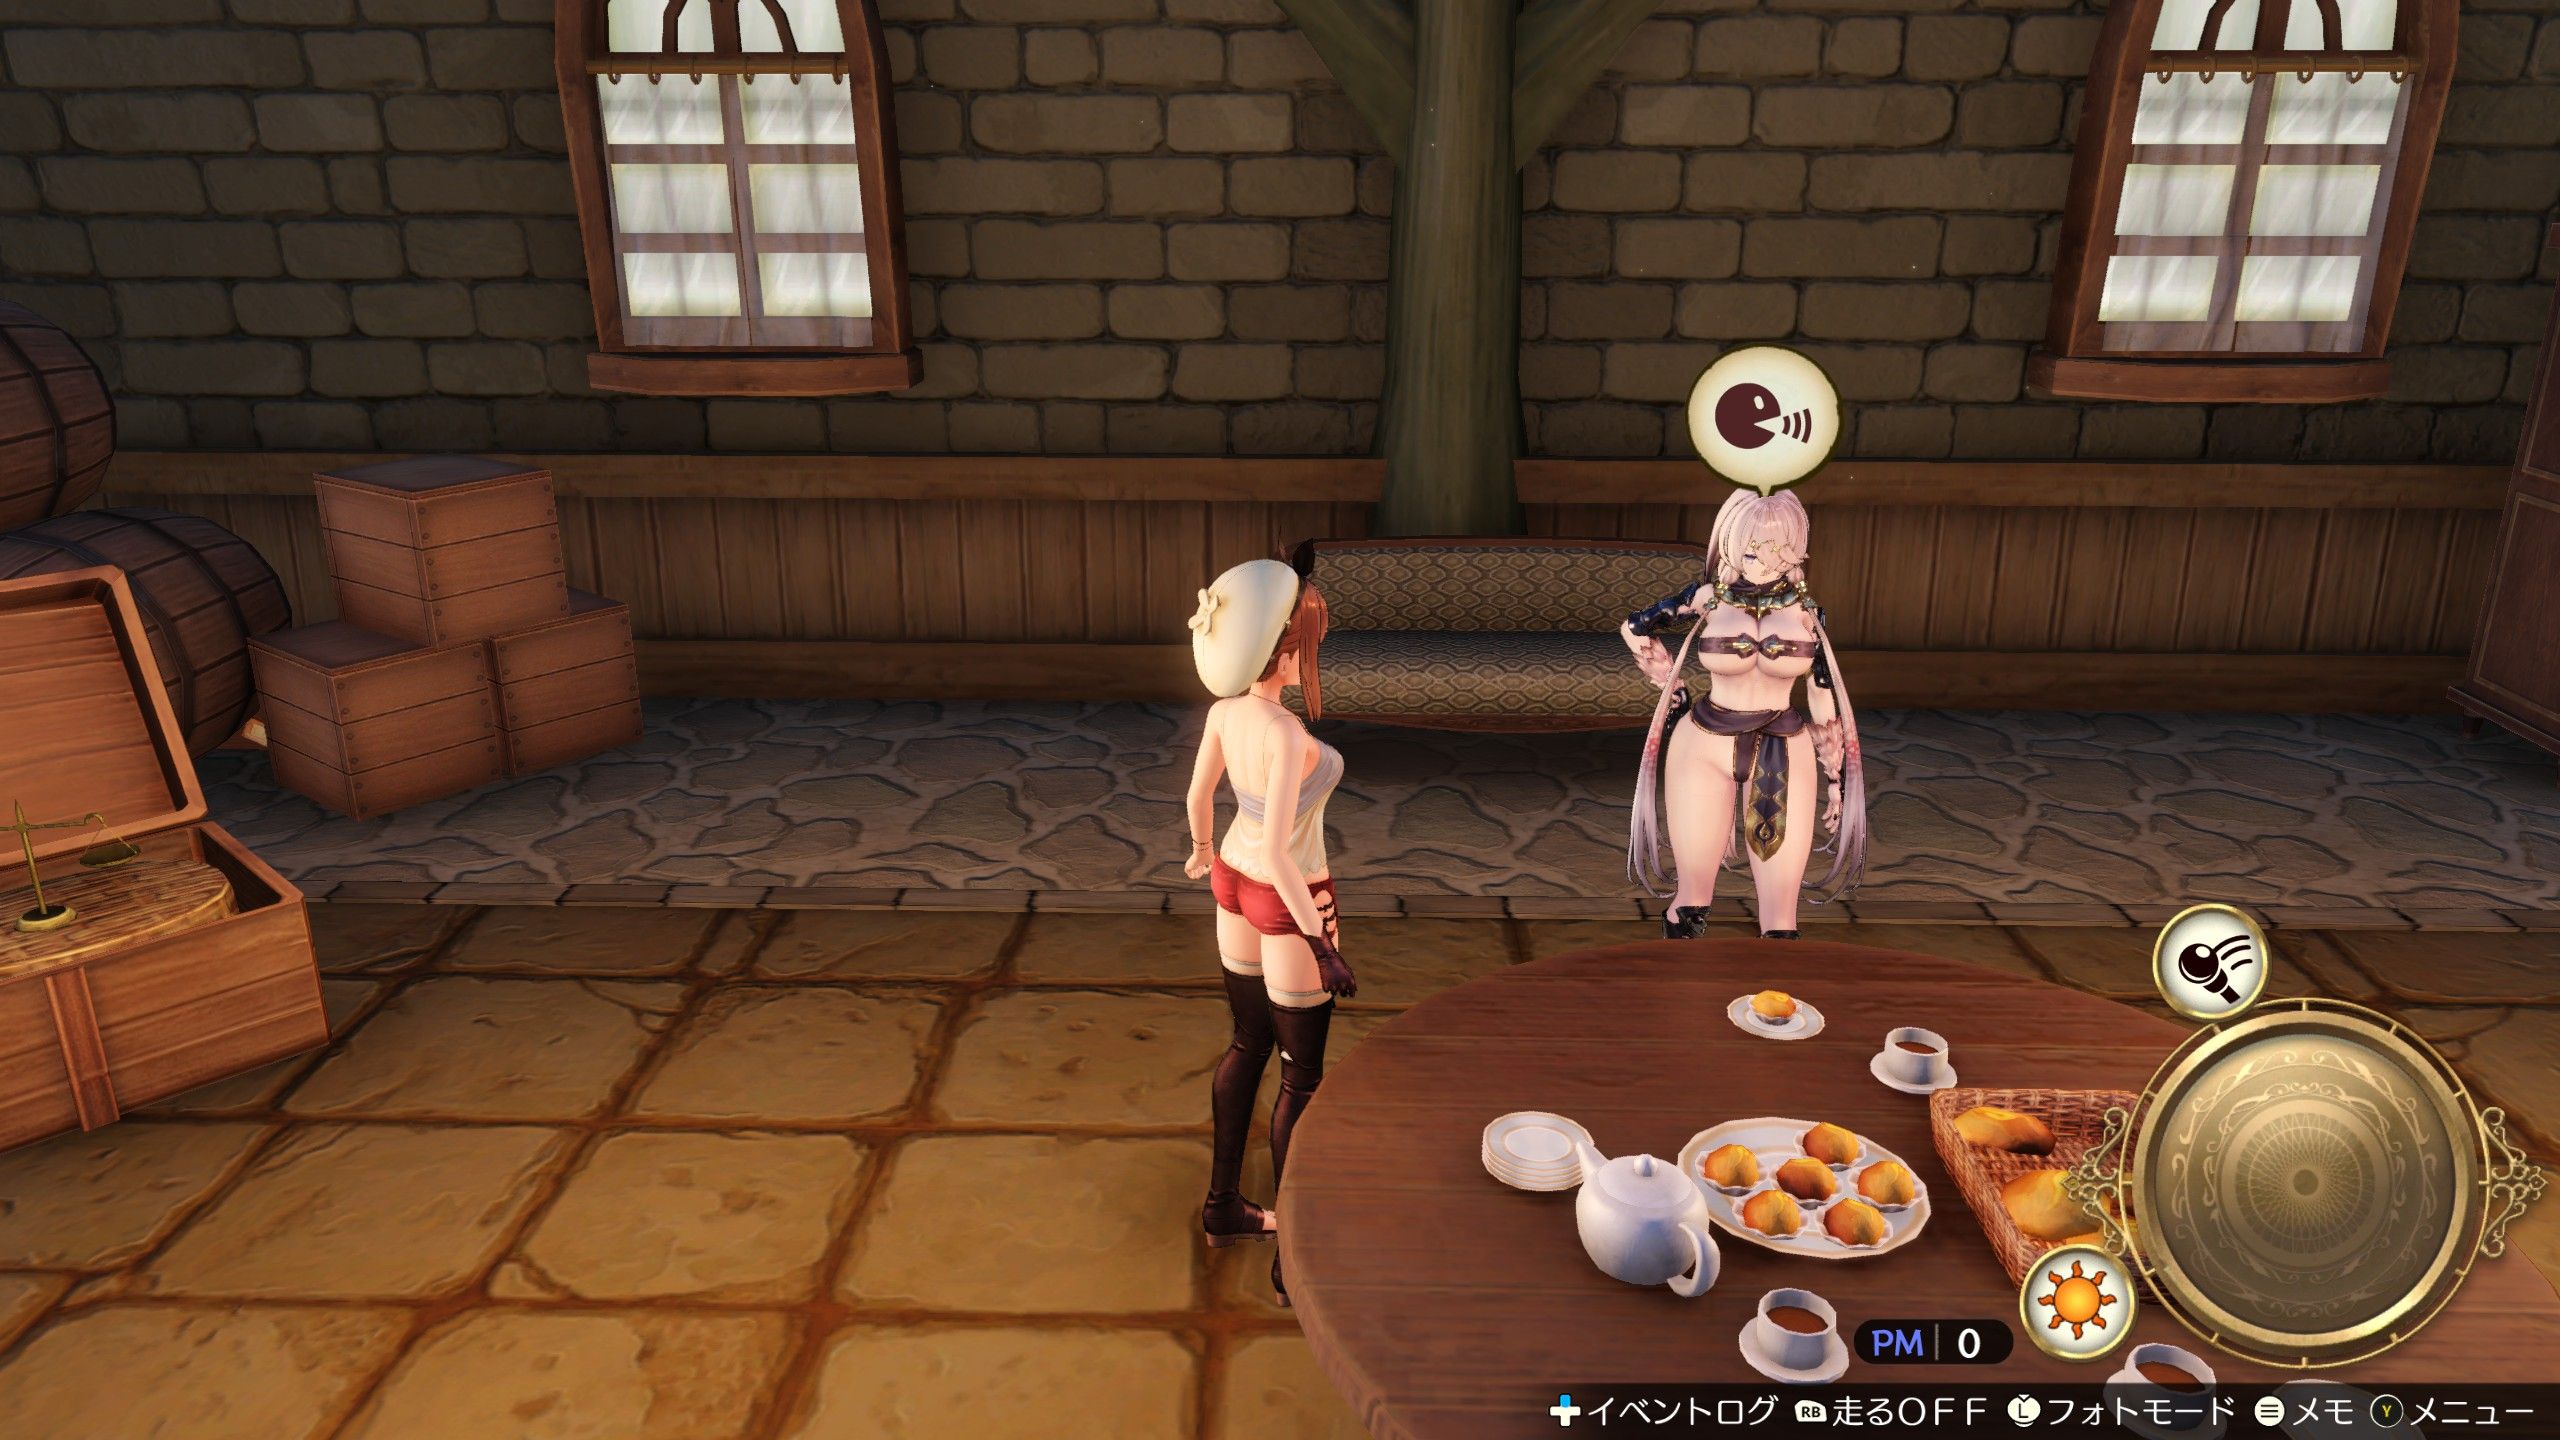 Buy a PC version liza atelier but also spend 2 days to make nipples transparent with erotic MOD ... 5